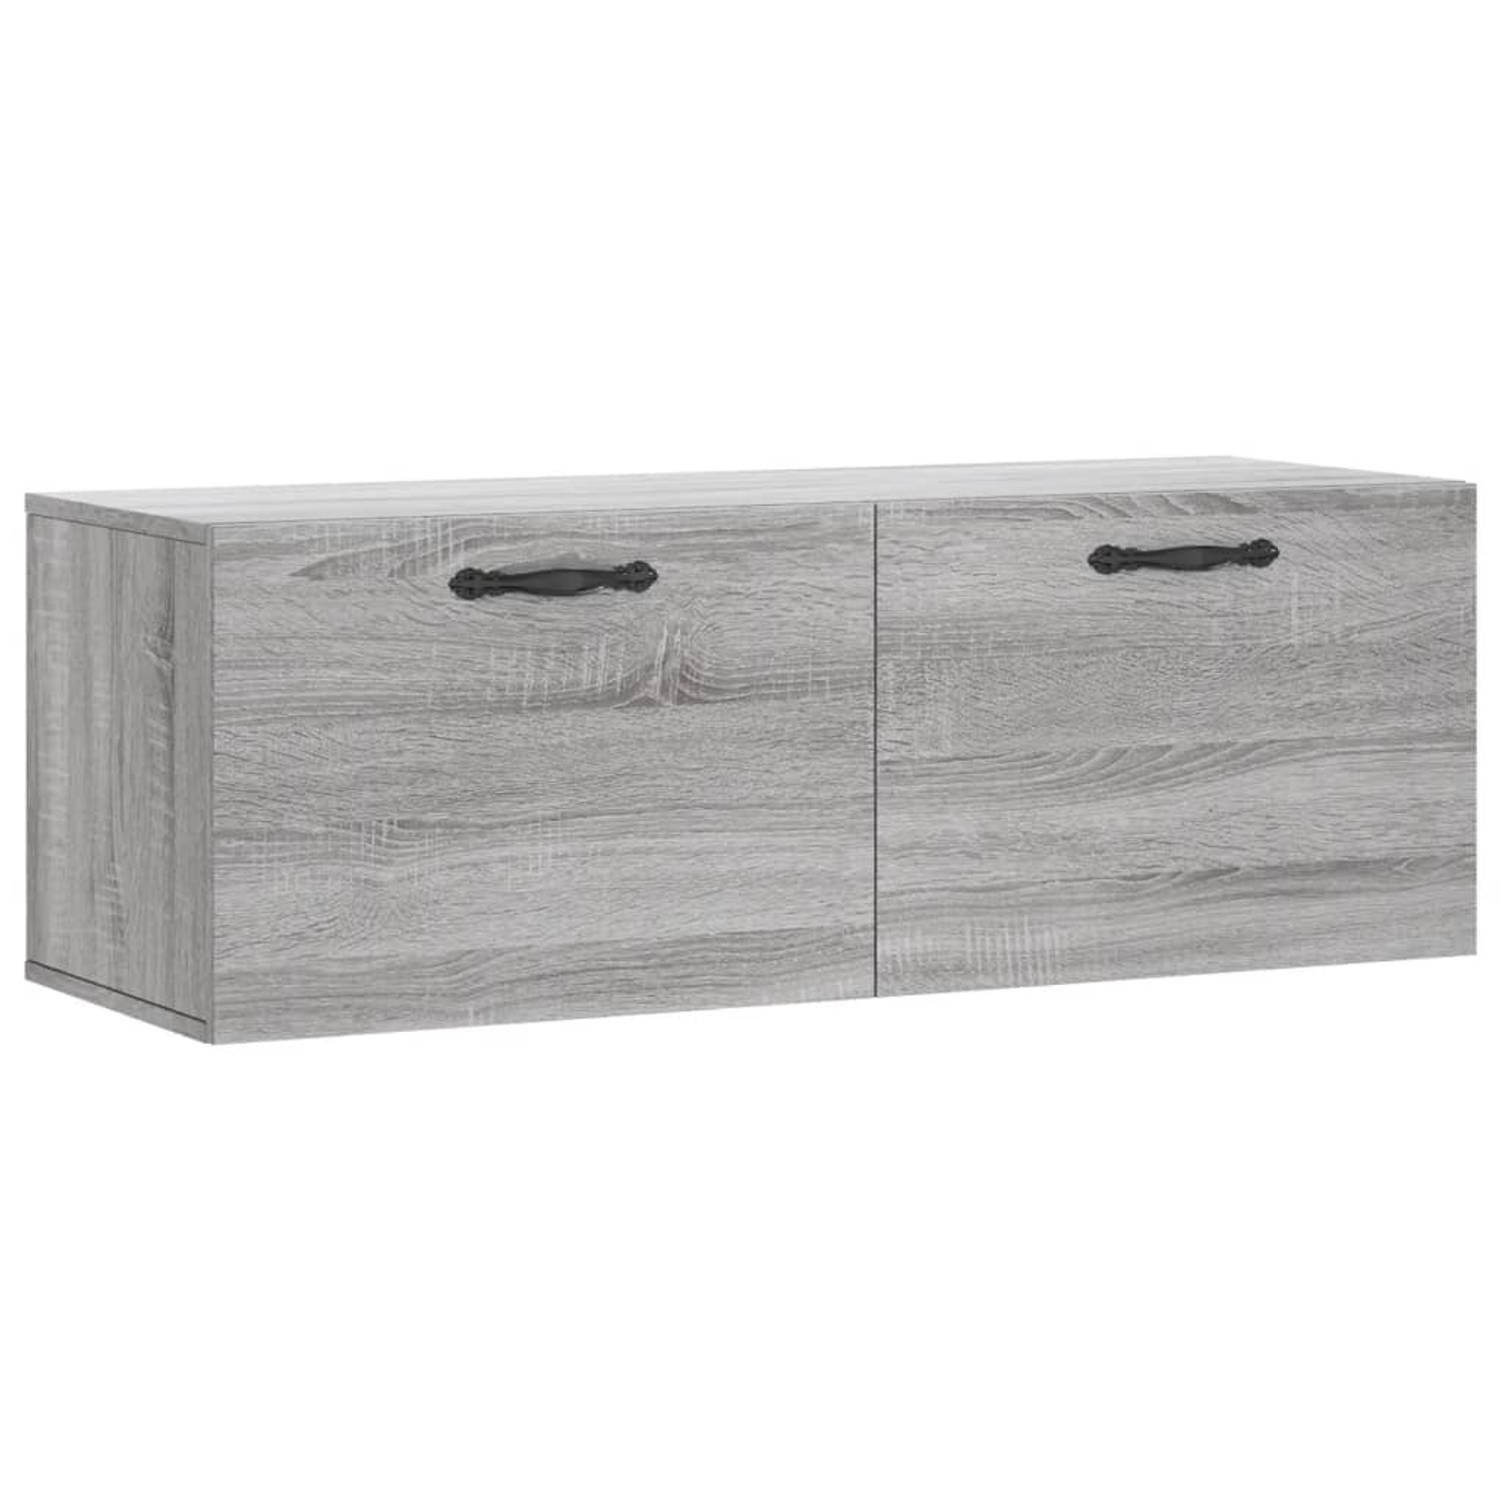 The Living Store Wandkast - Gray Sonoma Oak - 60 x 36.5 x 35 cm - Floating Display - Durable Material